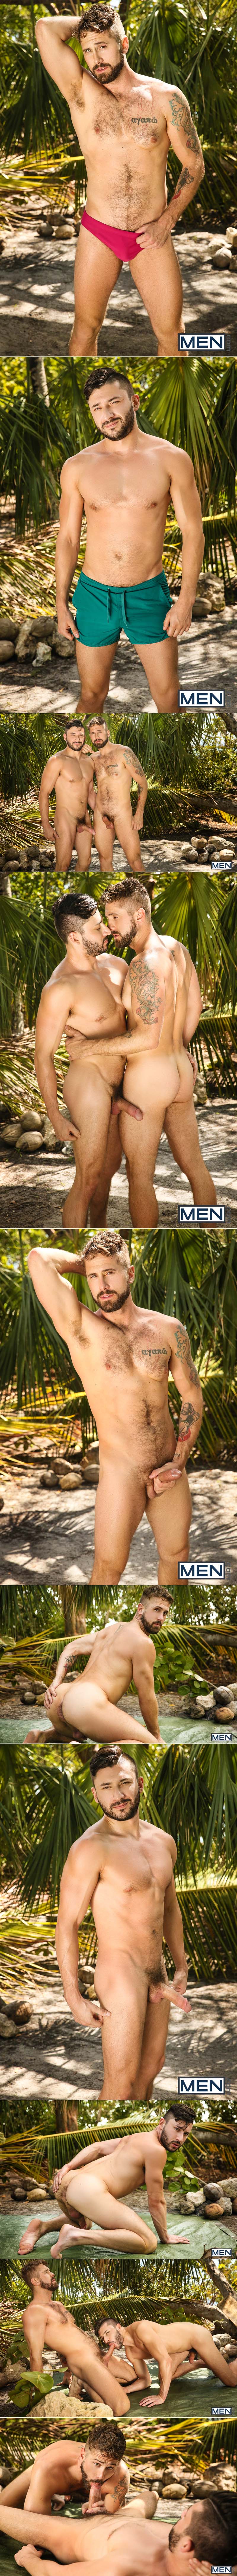 The Island, Part Two (Scott DeMarco and Wesley Woods Flip-Fuck) at MEN